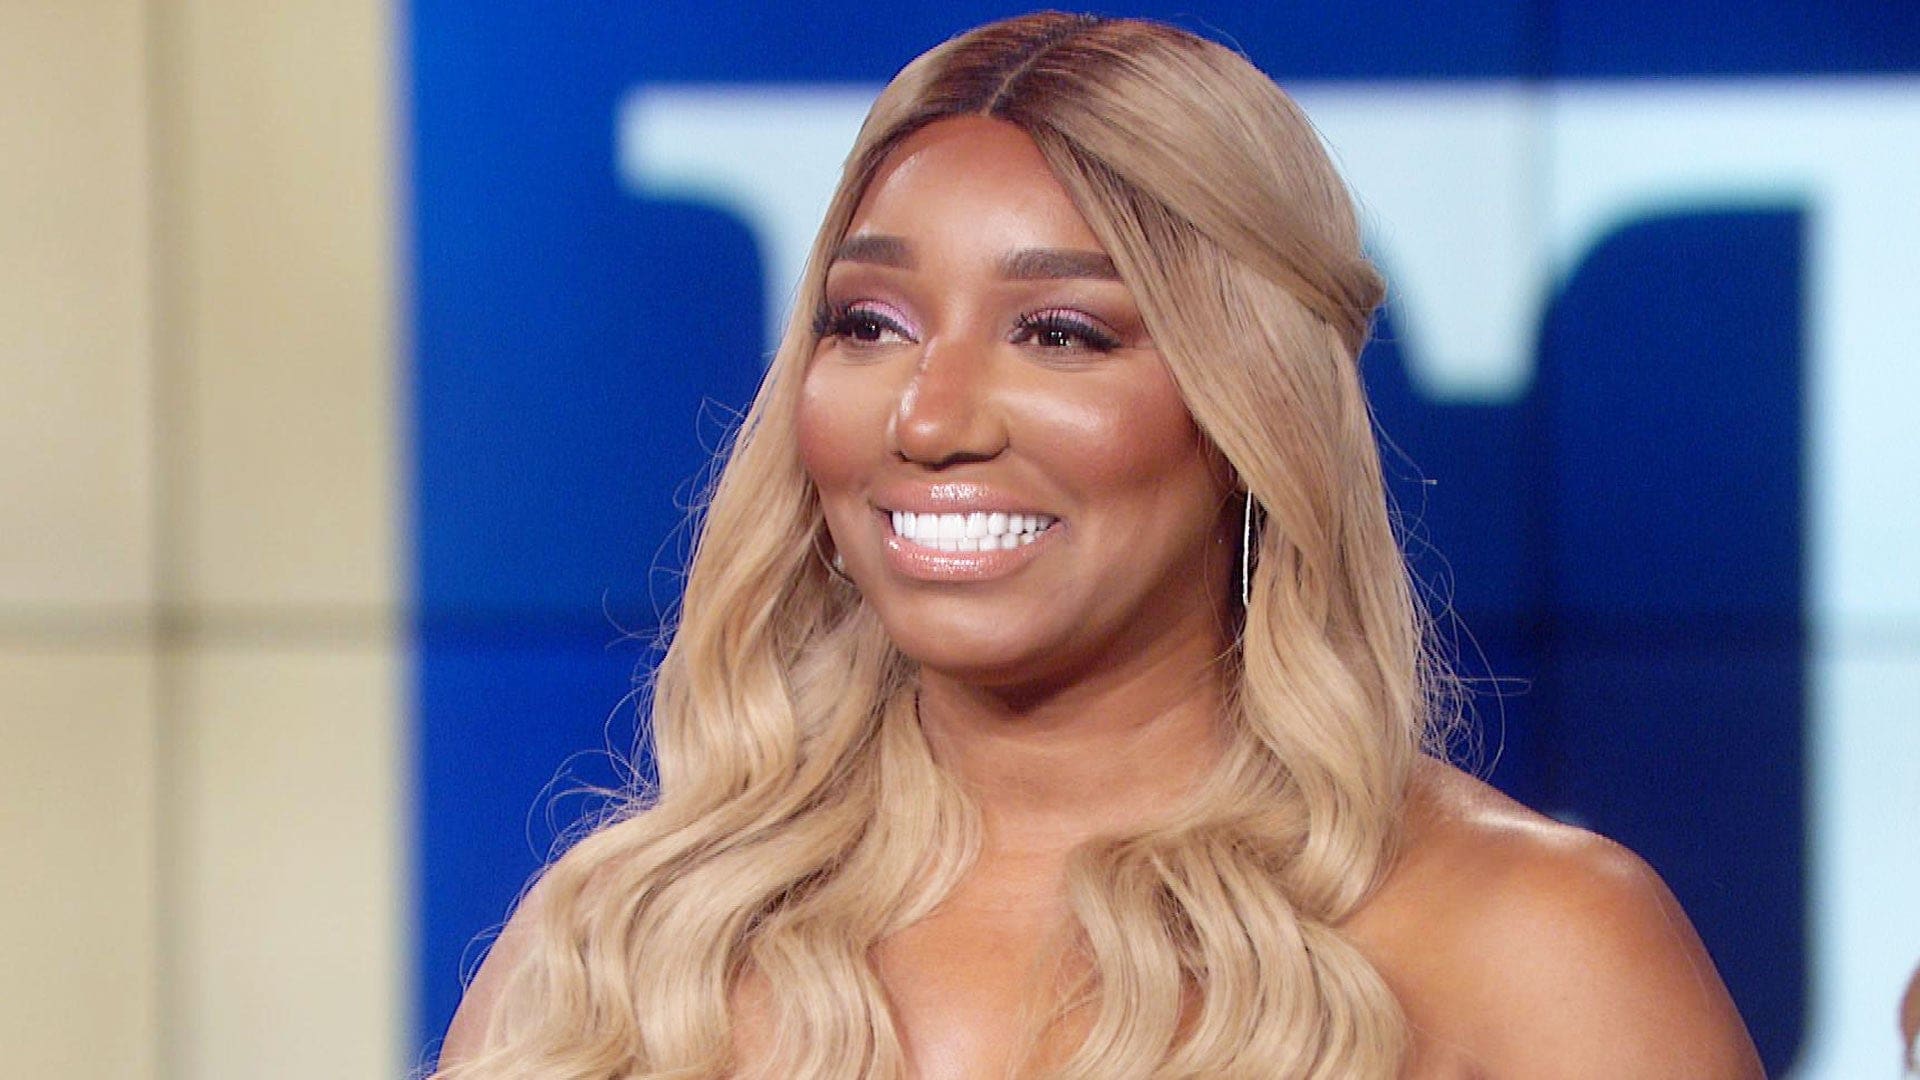 NeNe Leakes Addresses The Time When Gregg Leakes Was Talking To One Of Her Former Employees Via Facetime - See The Video